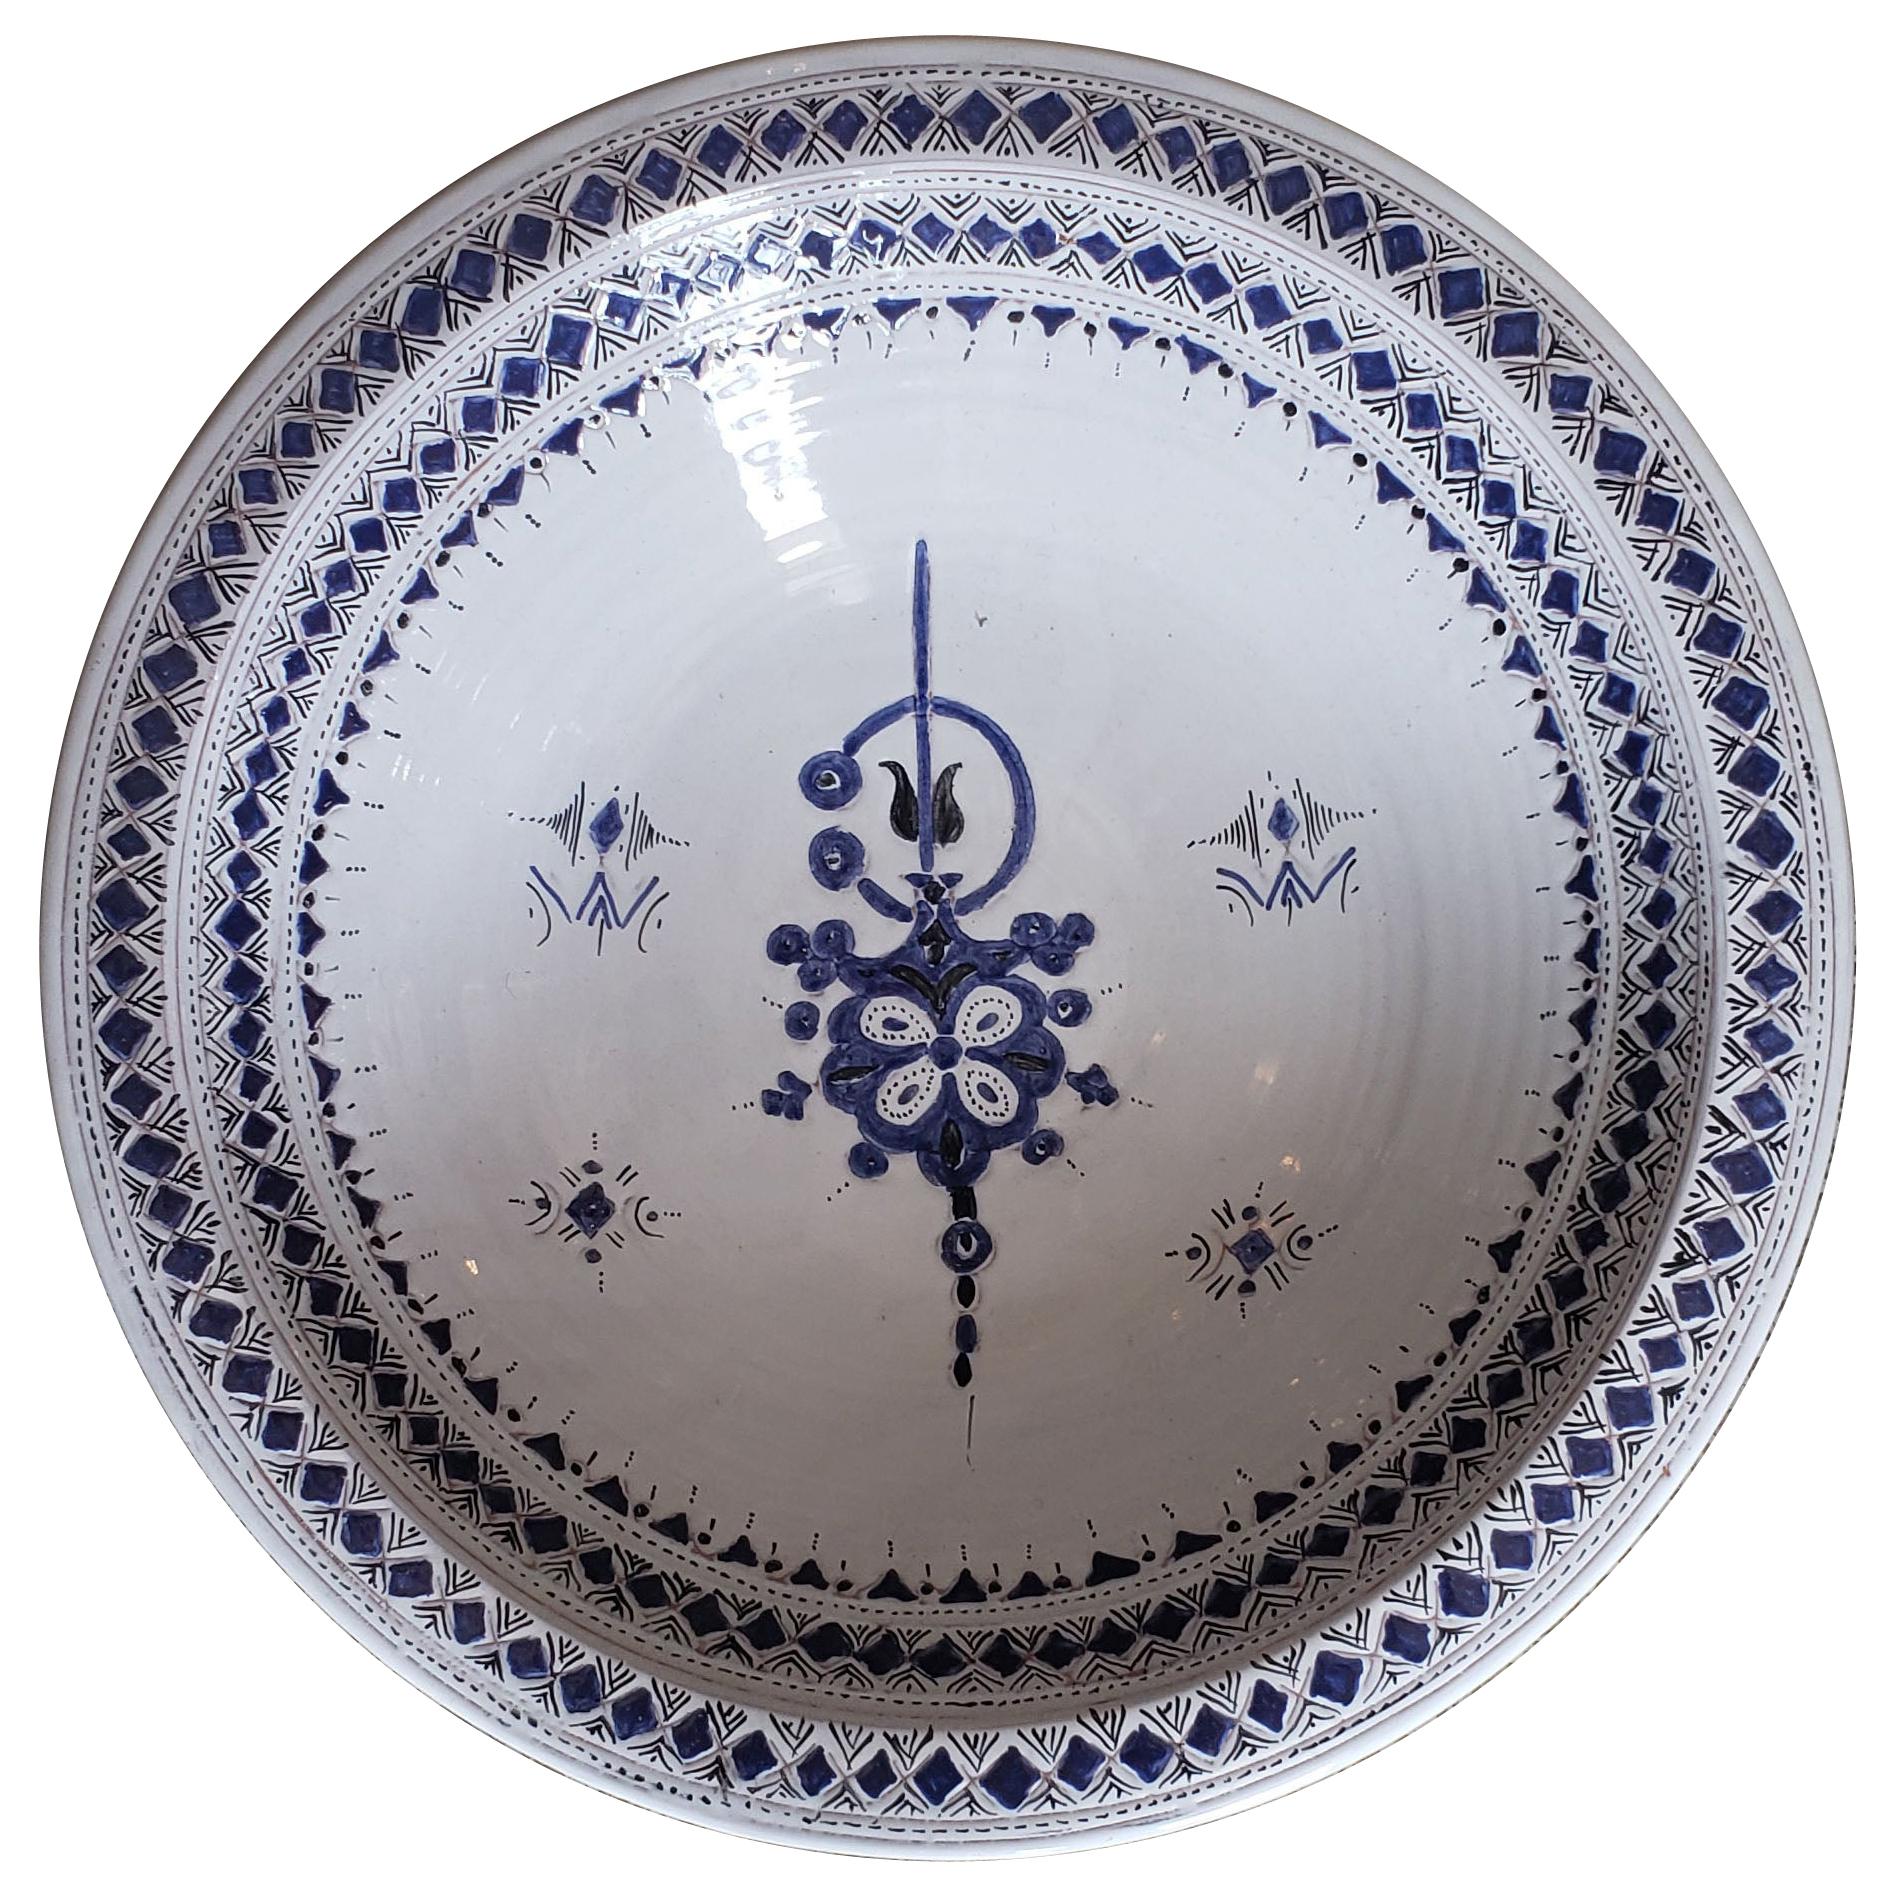 Touareg Emblem, Moroccan Extra Large Hand Painted Plate 1 For Sale